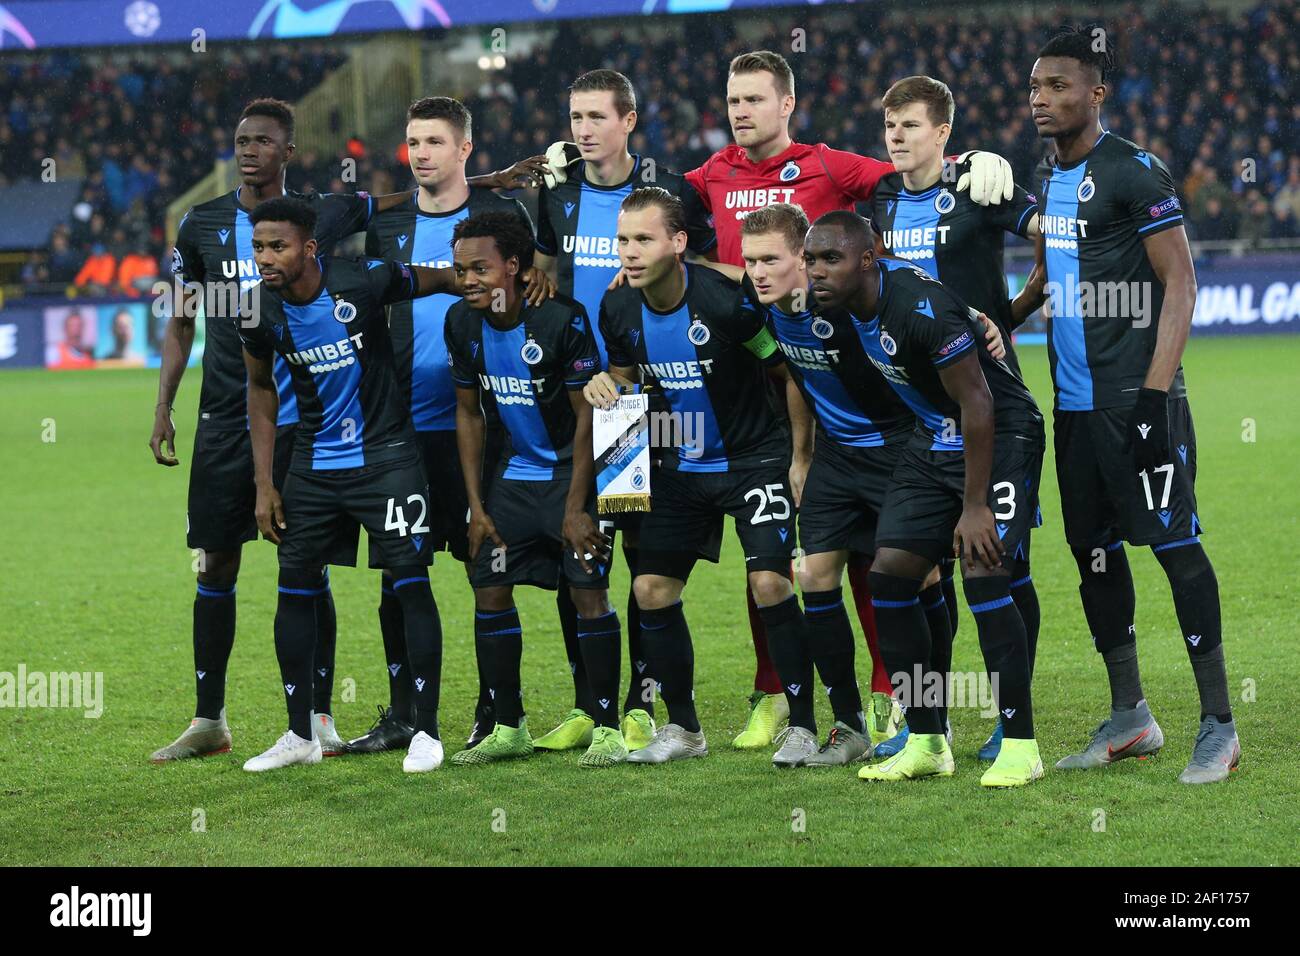 Brugge, Belgium. 11th Dec, 2019. Players of Club Brugge pose for a group  photo before a Group A match of the 2019-2020 UEFA Champions League between Club  Brugge and Real Madrid in